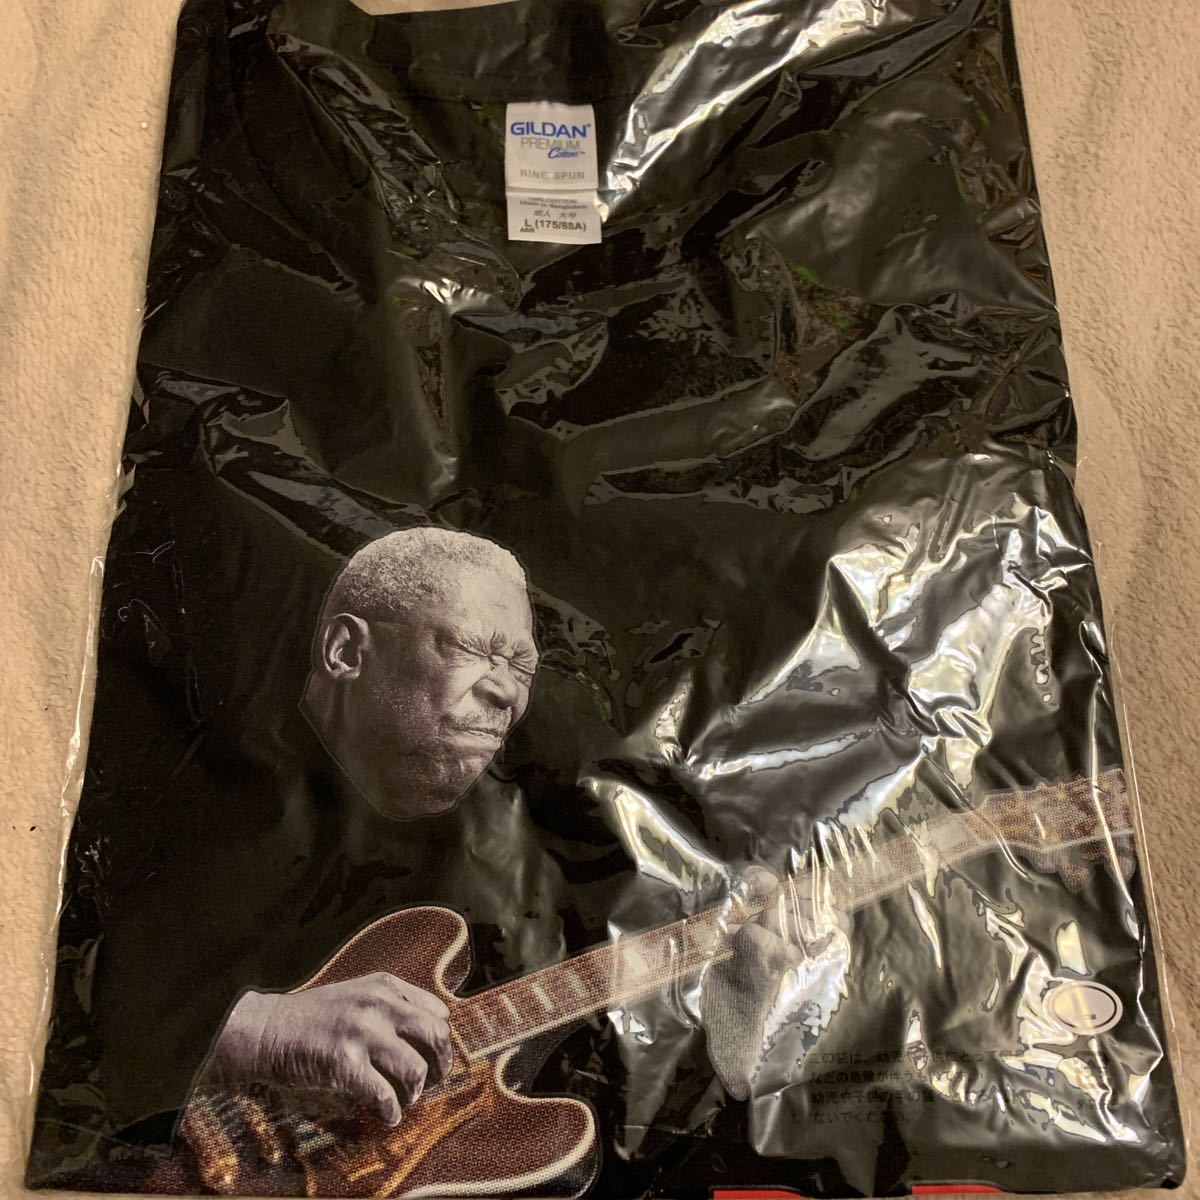  T-shirt |BB King | limited goods | unused | size L| hard-to-find |. rare 